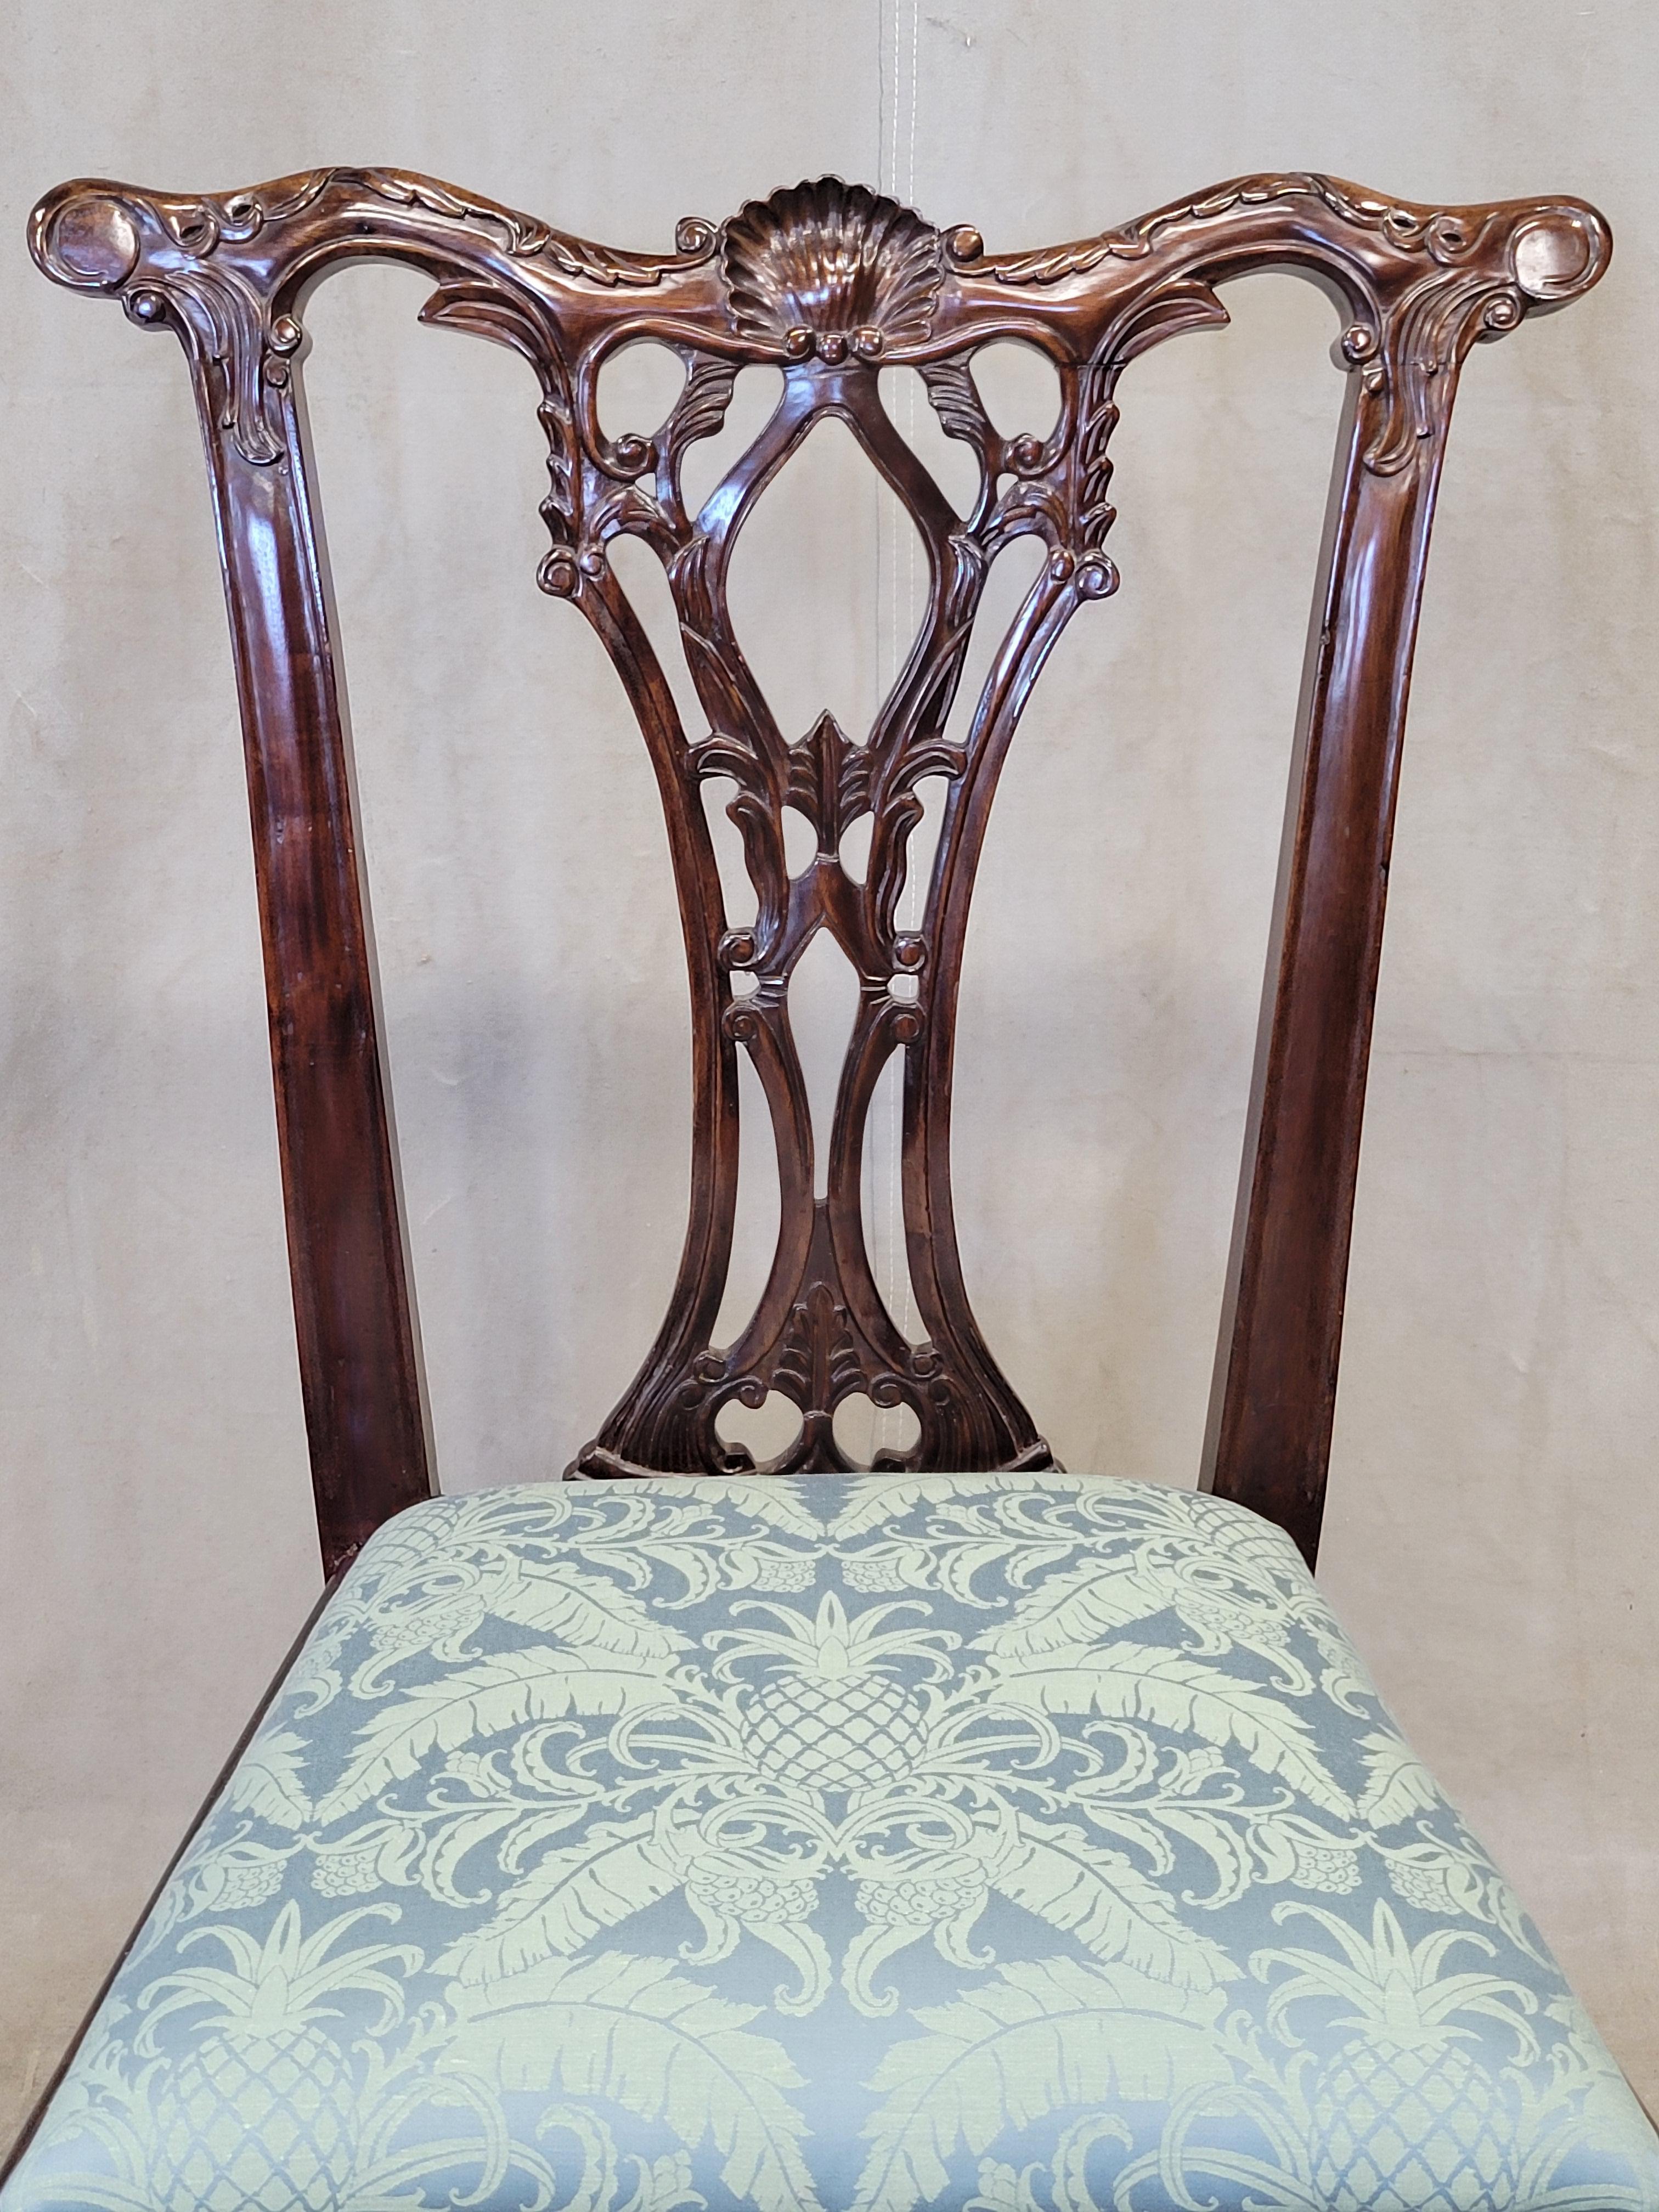 Unknown Vintage Mahogany Chippendale Dining Chairs With Teal Damask - Set of 6